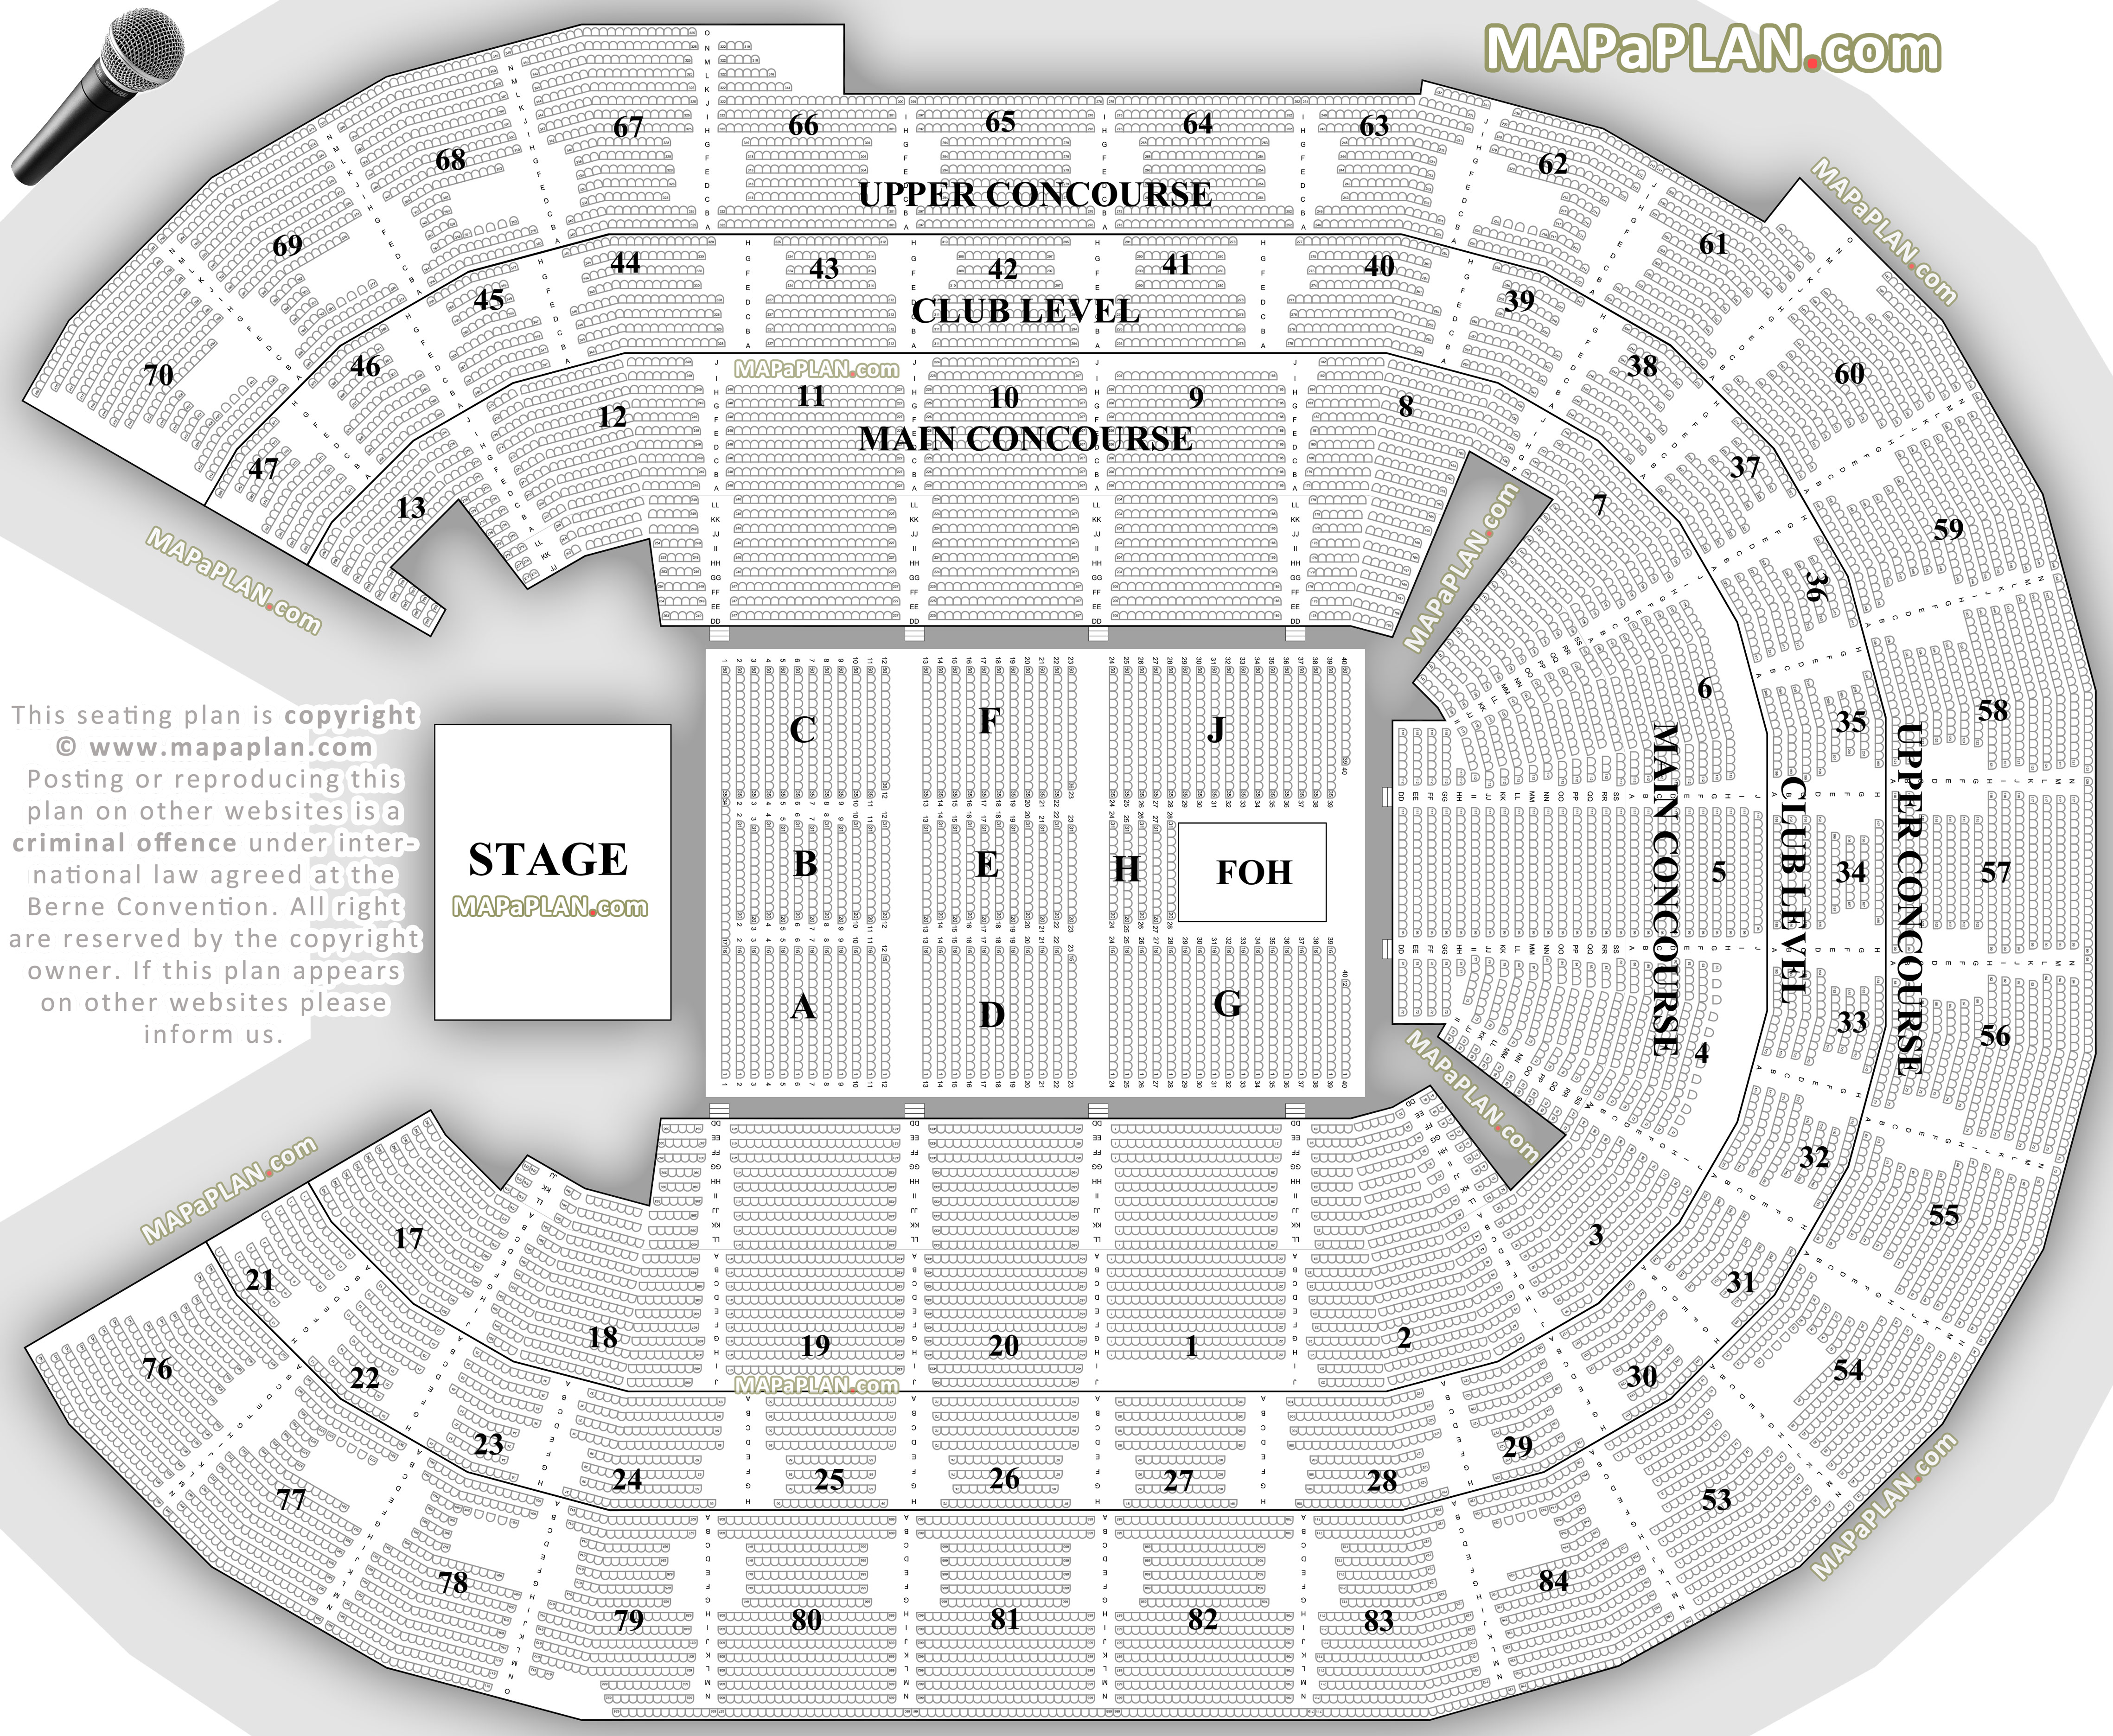 Sydney Allphones Arena seat numbers detailed seating plan ...